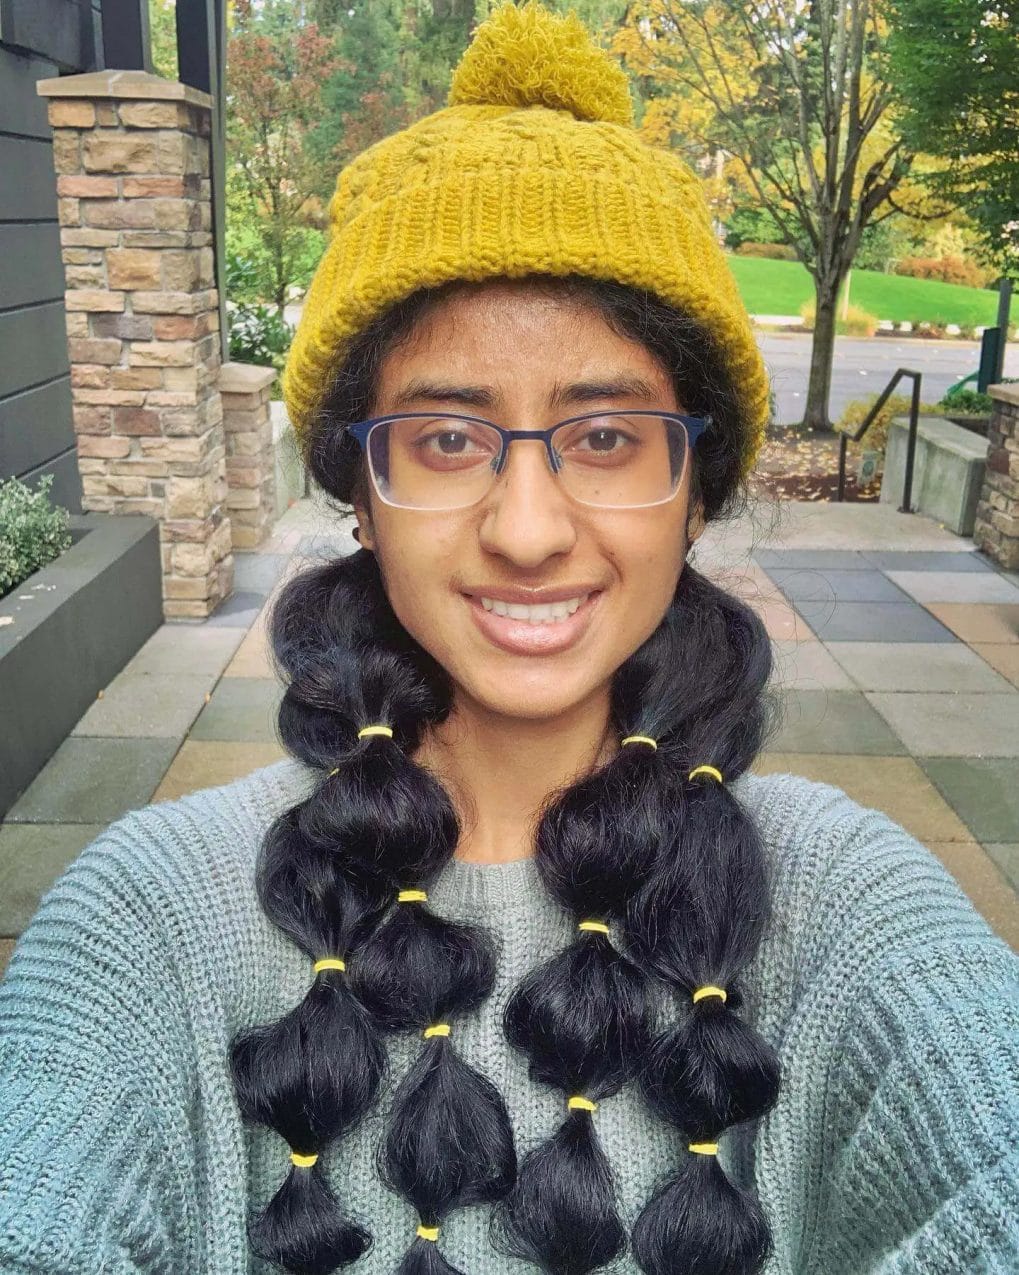 Playful bubble braids paired with a vibrant mustard beanie for a bold look.